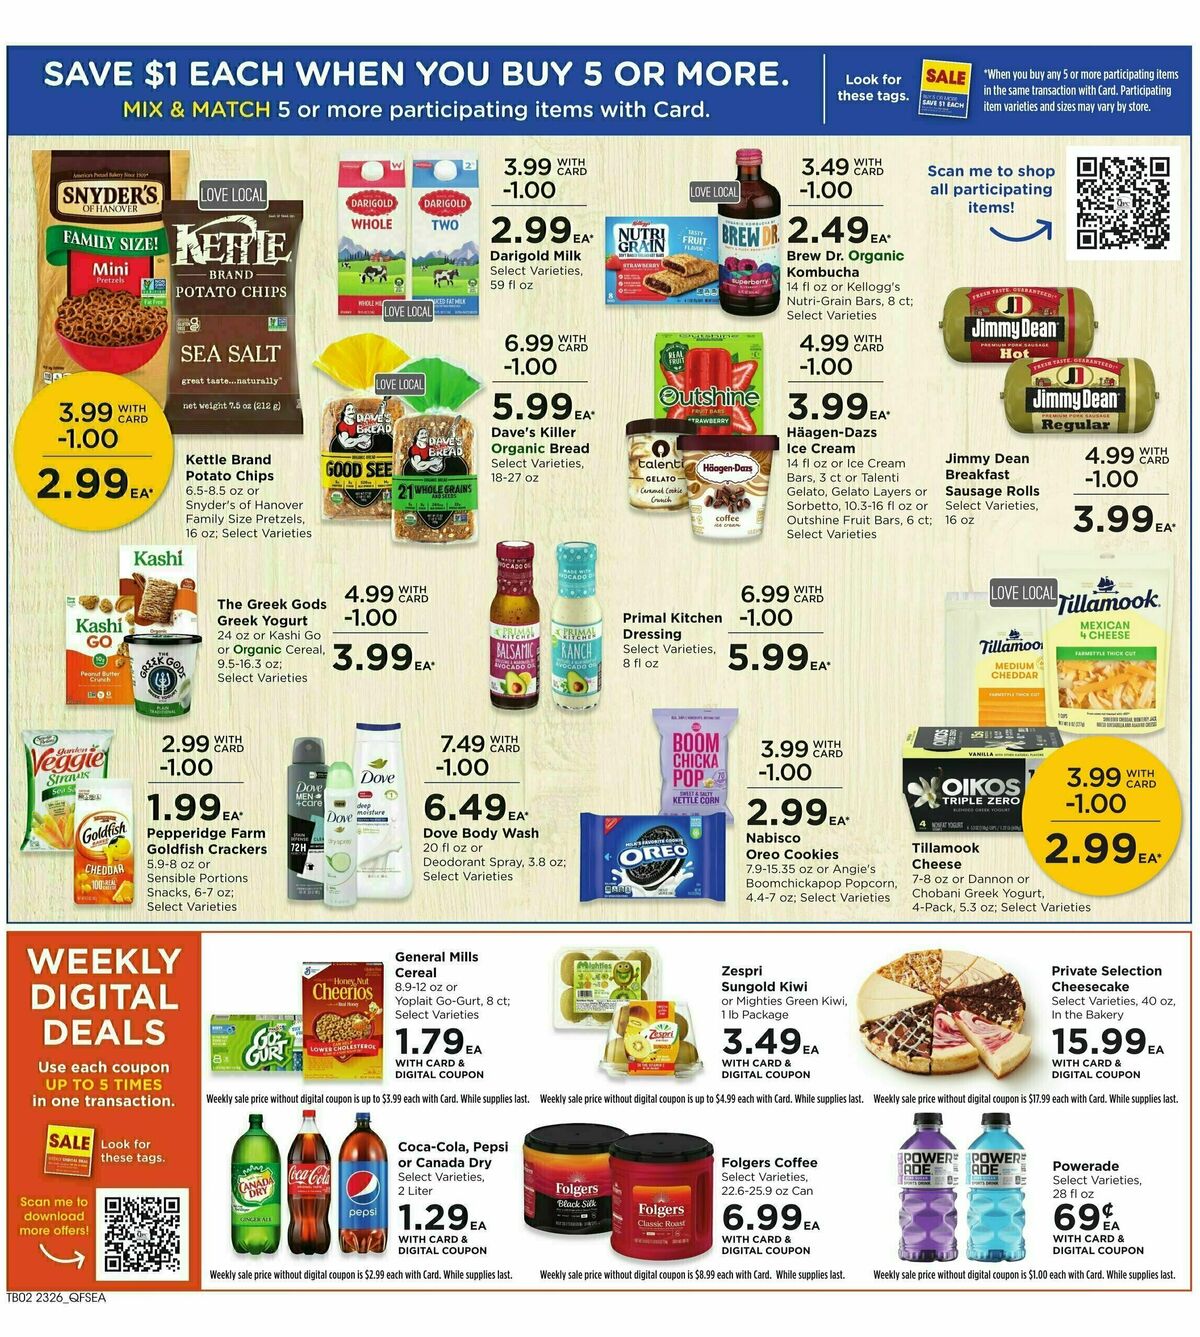 QFC Weekly Ad from July 26